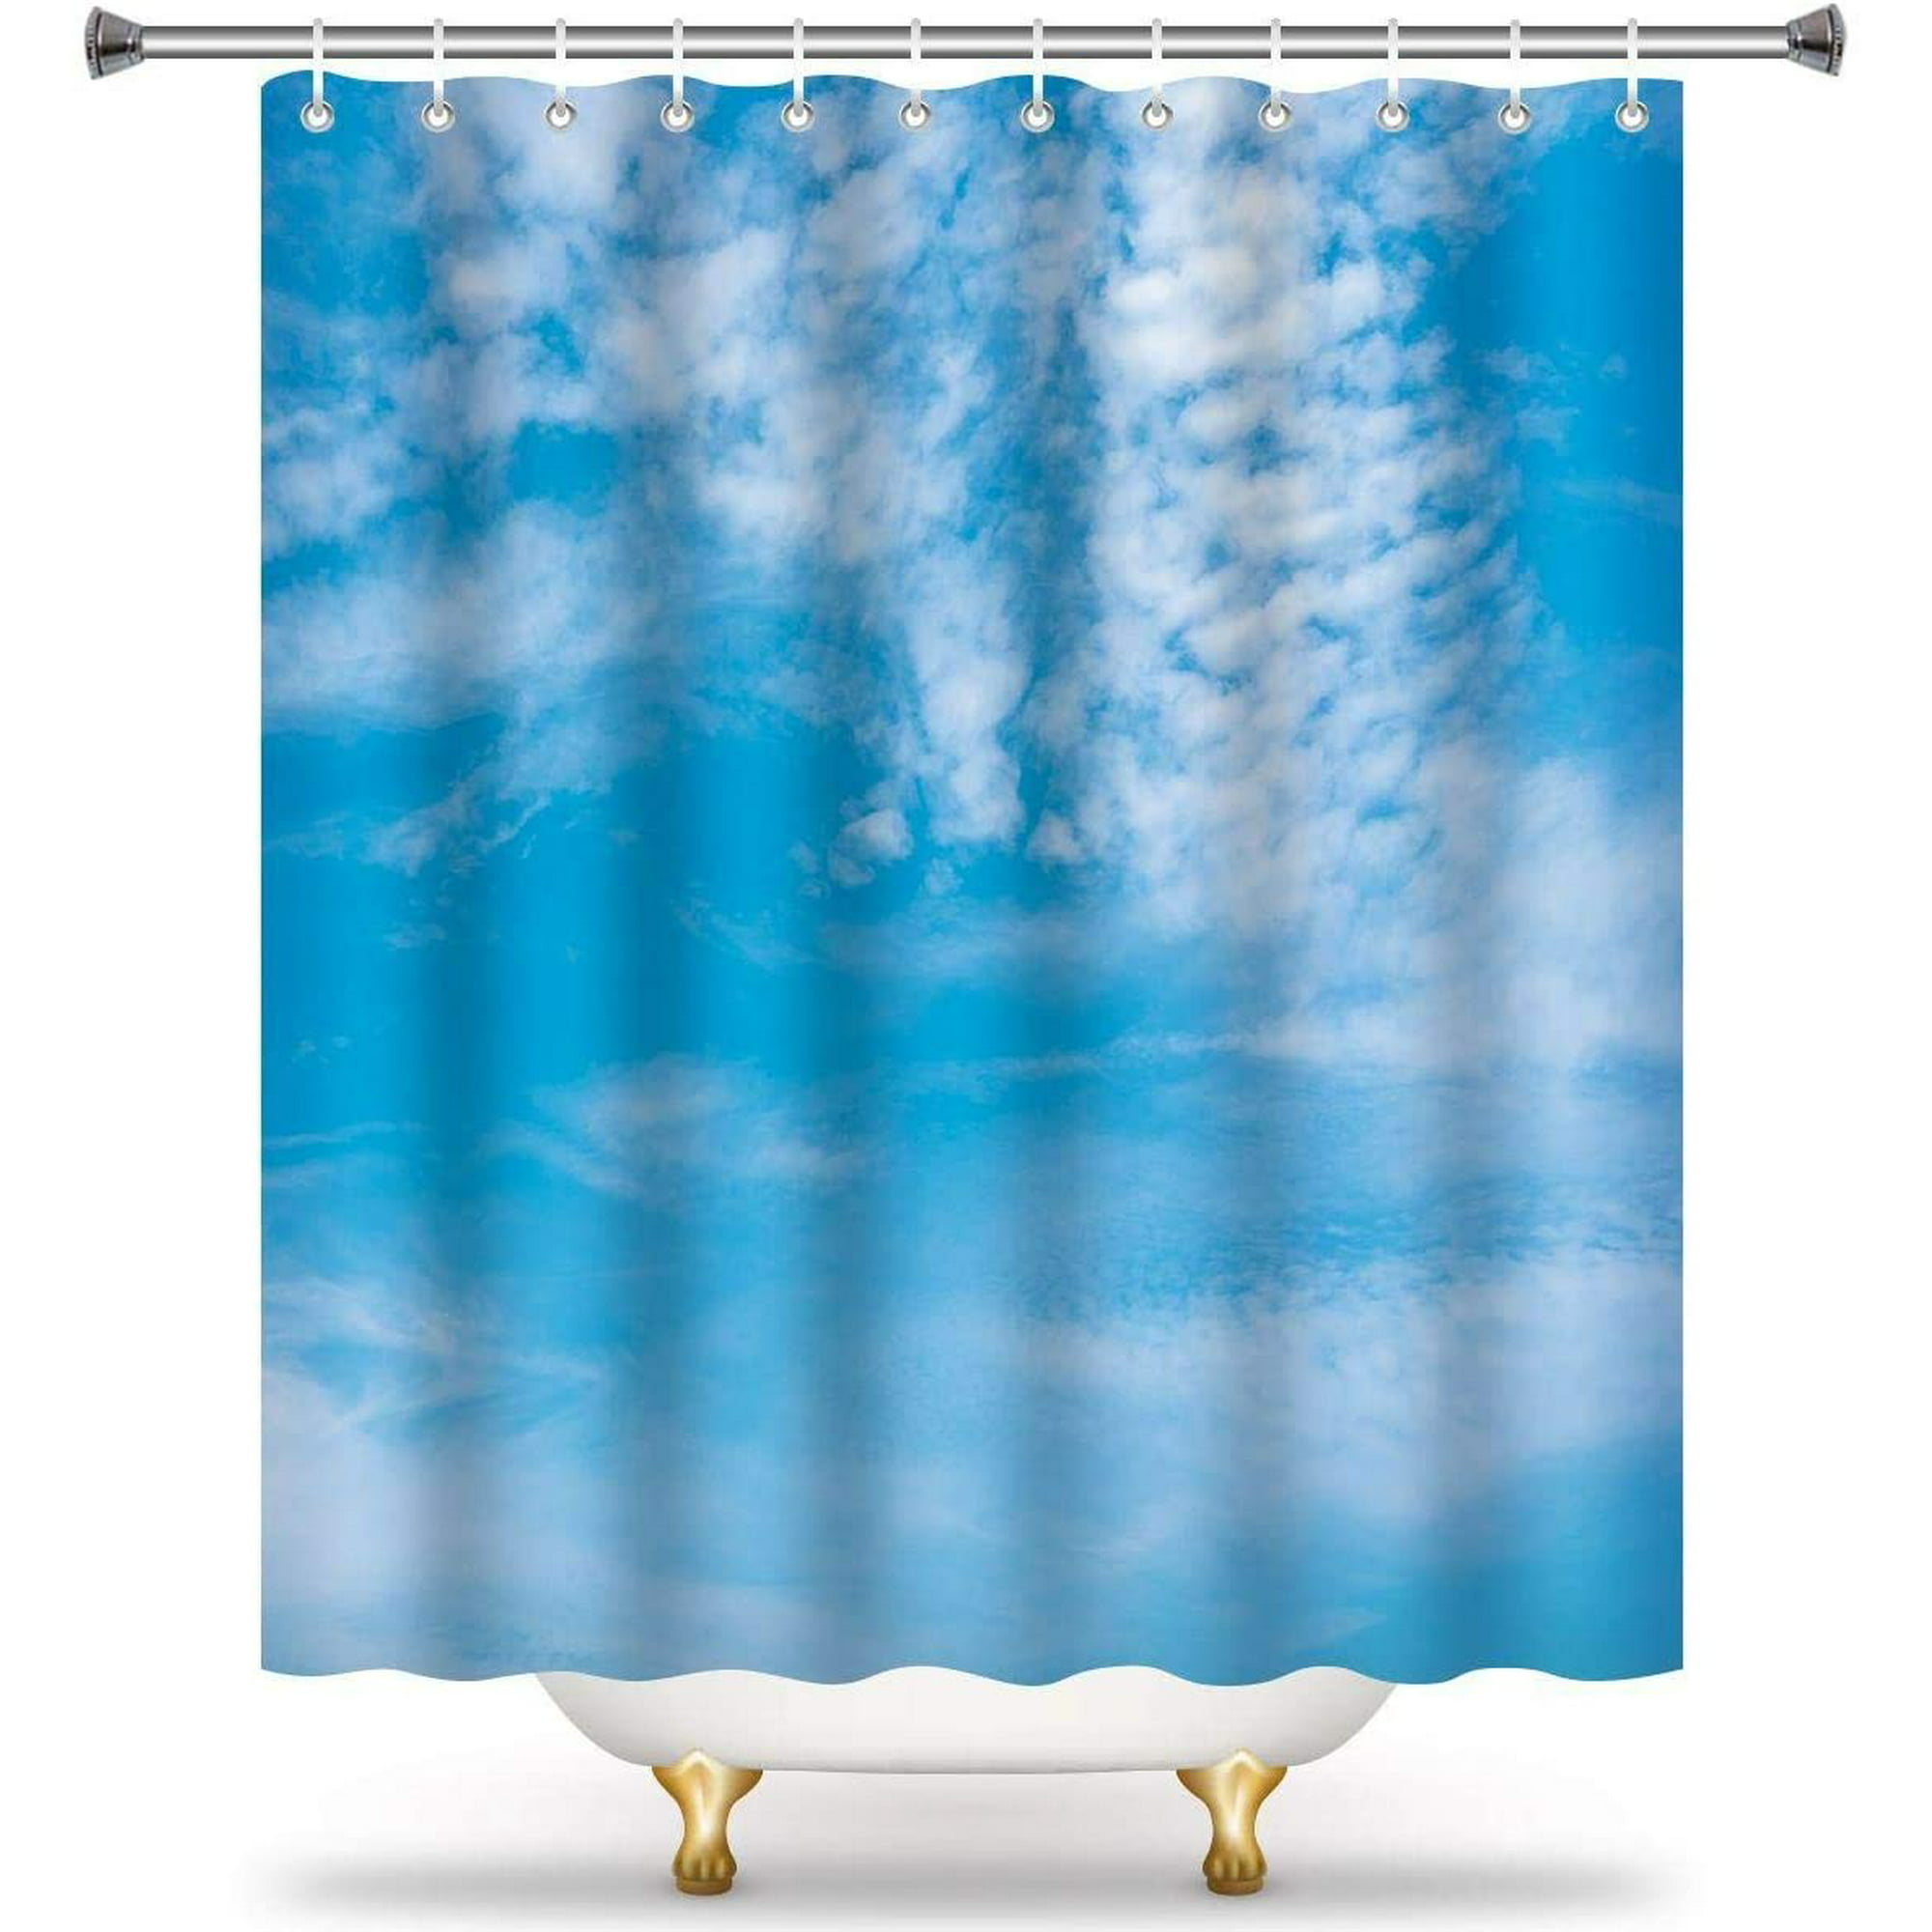 Sunny Shower Curtain Liner Weather, How To Select Shower Curtains